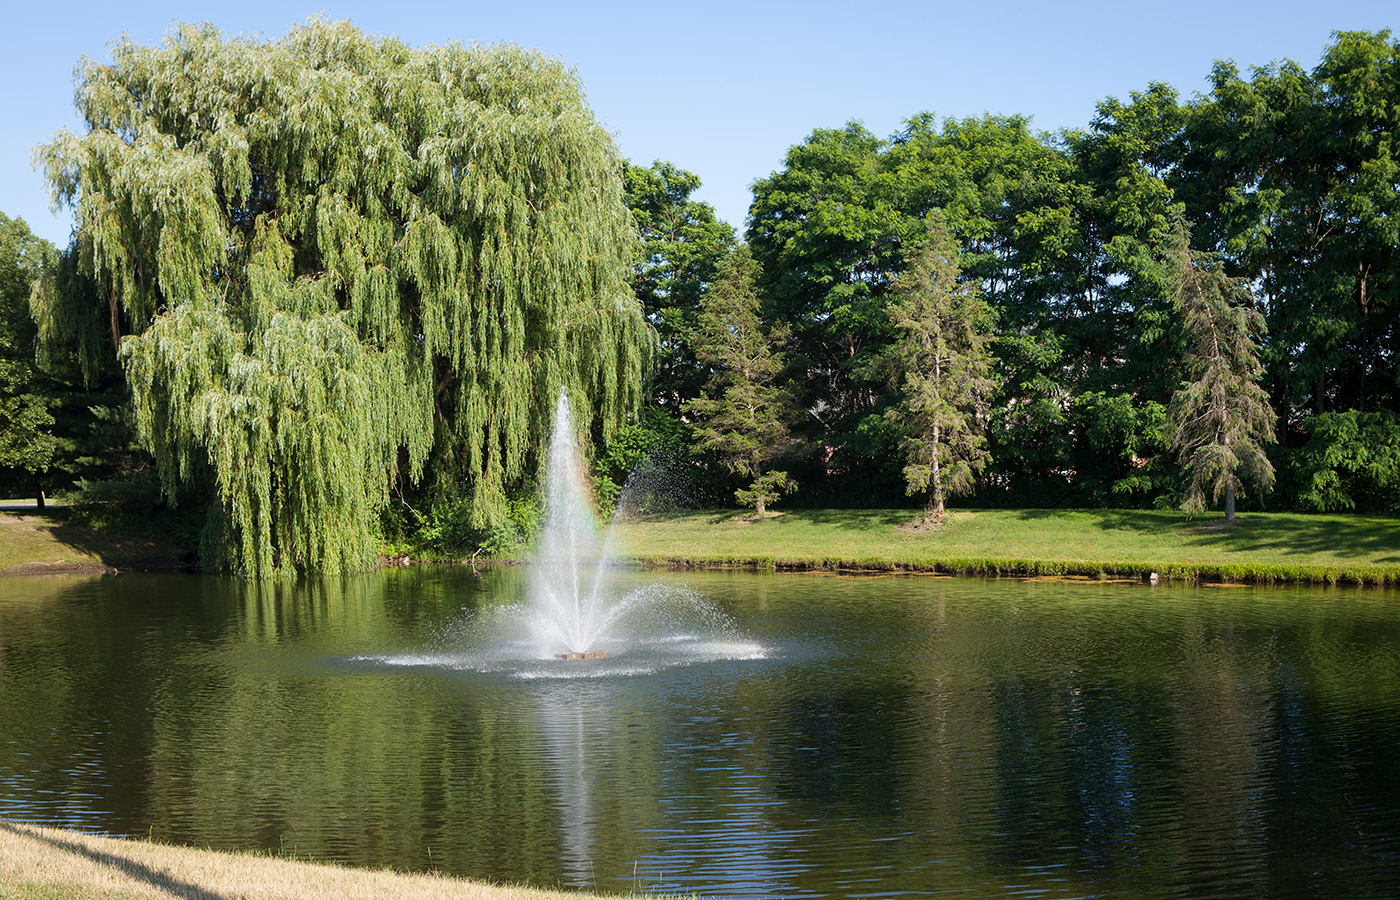 Image of the pond and its fountain surrounded by trees